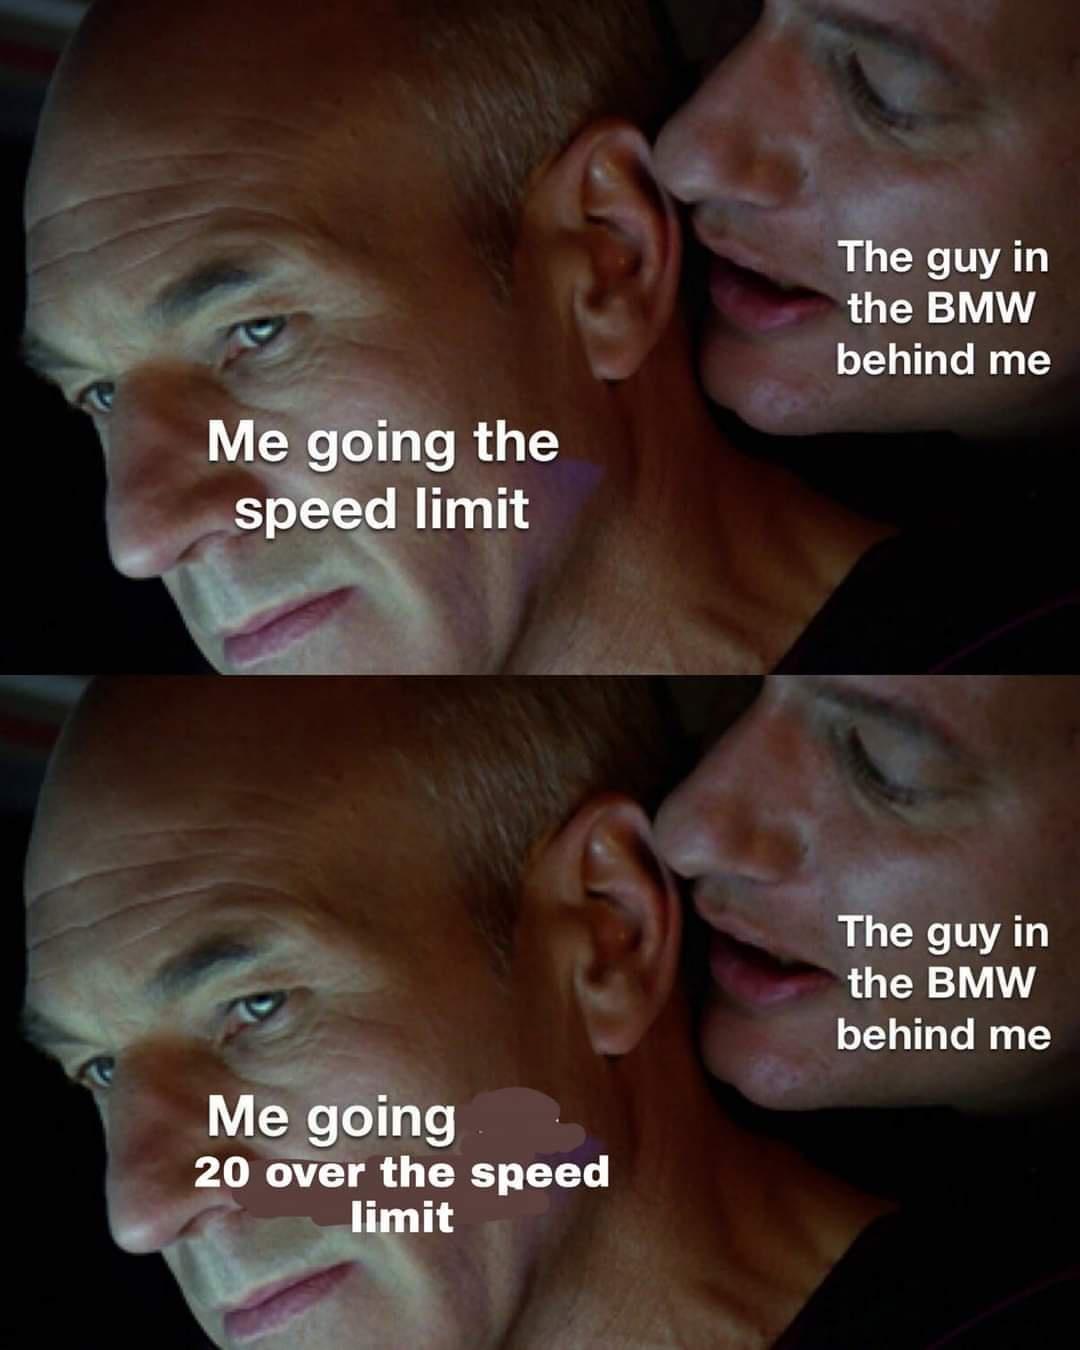 me going the speed limit - The guy in the Bmw behind me Me going the speed limit The guy in the Bmw behind me Me going 20 over the speed limit